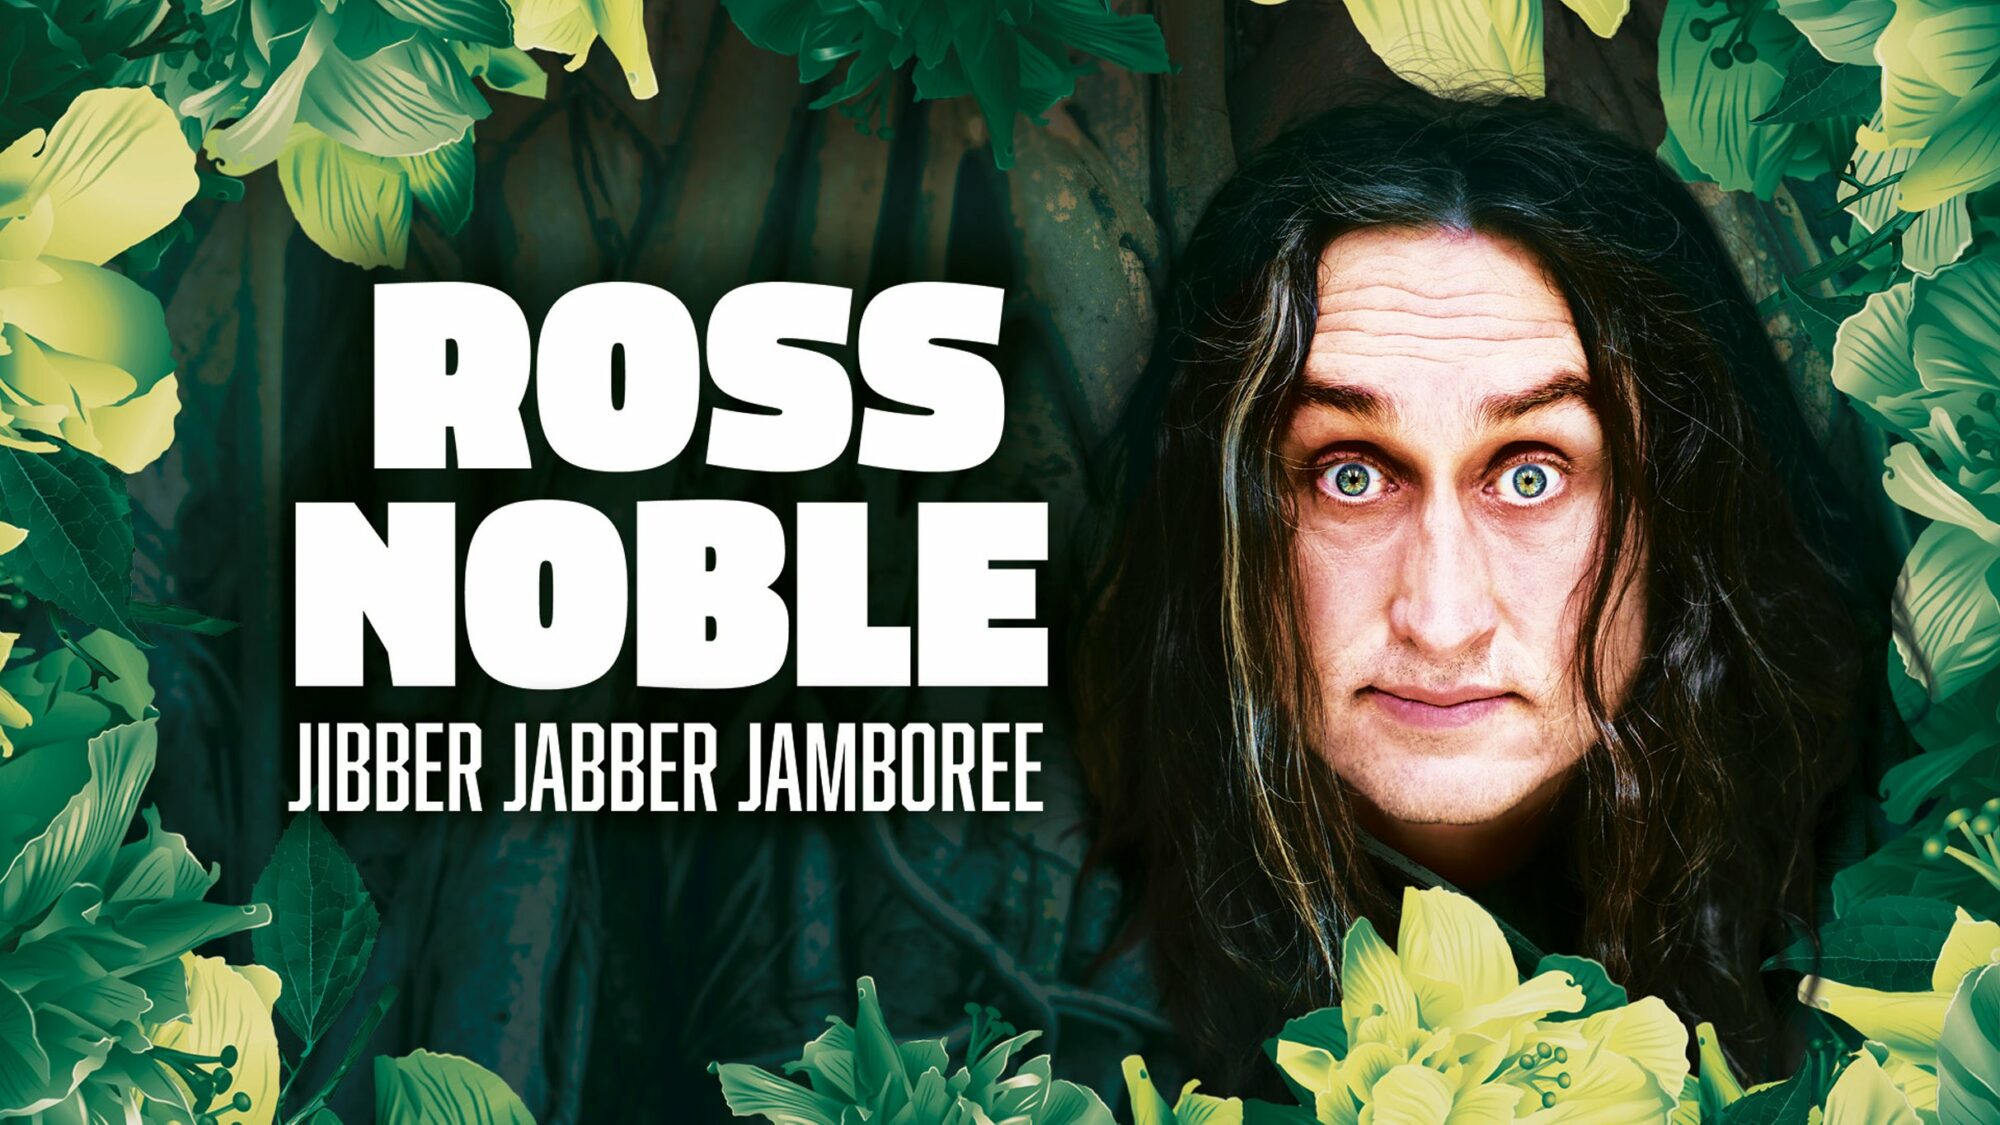 Image name Ross Noble Jibber Jabber Jamboree at The Royal Hall Harrogate the 11 image from the post Ross Noble - Jibber Jabber Jamboree at The Royal Hall, Harrogate in Yorkshire.com.